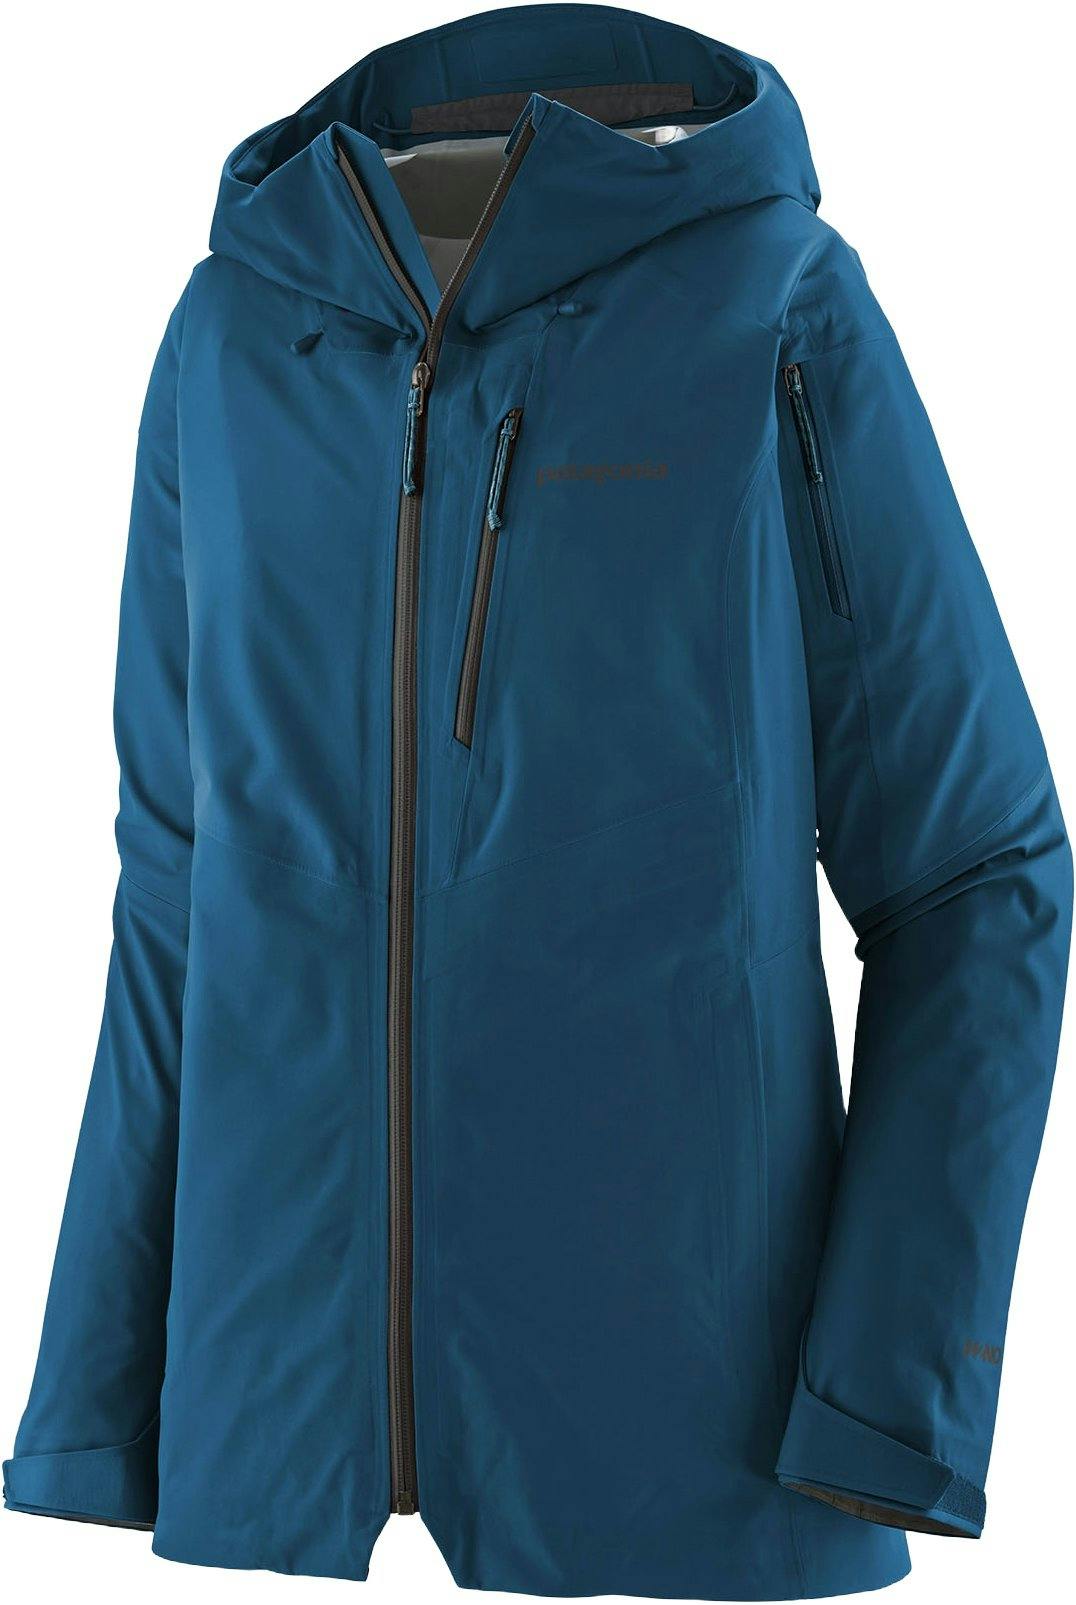 Product image for SnowDrifter Jacket - Women's